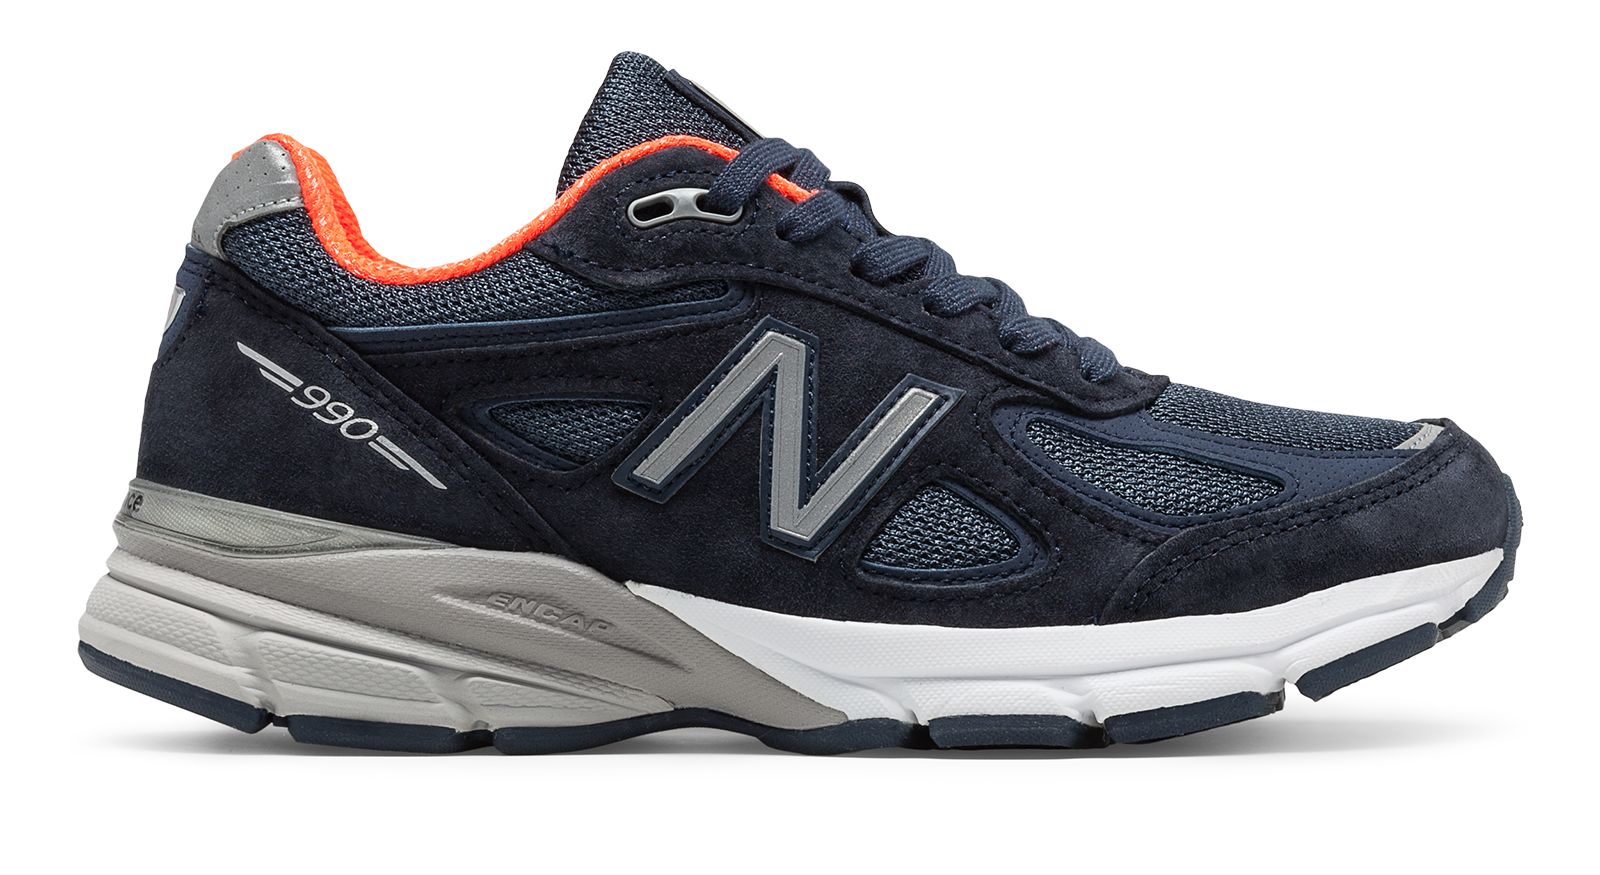 New Balance W990-V4 on Sale - Discounts Up to 57% Off on W990NV4 at Joe's New  Balance Outlet